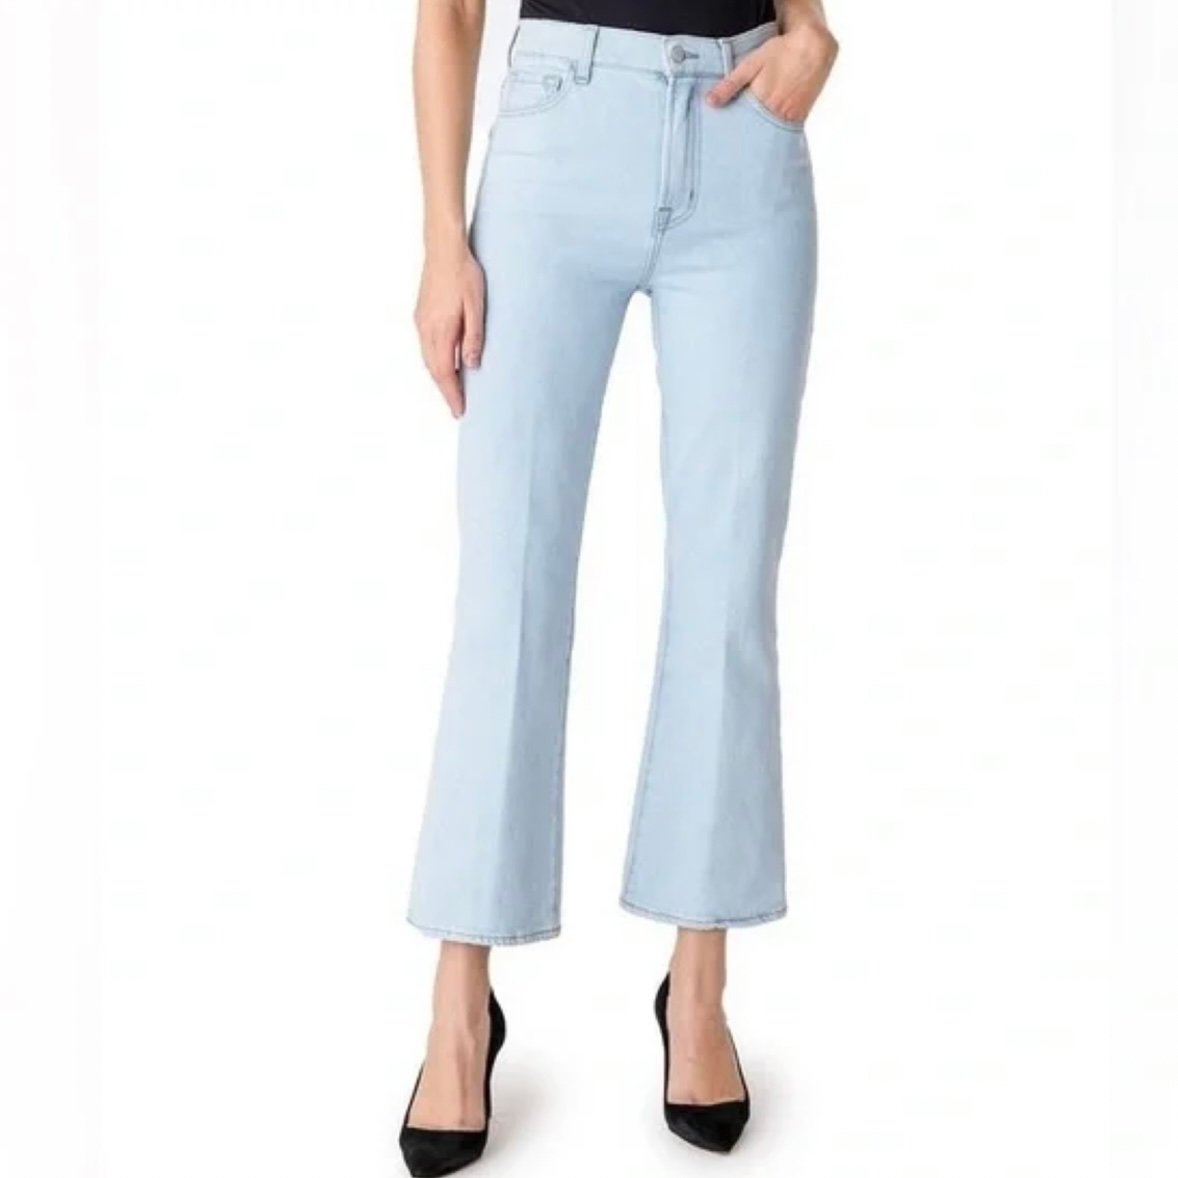 save up to 70% J Brand Jeans | Julia Surf High-Rise Flare Leg Jean | Size 28 lrOoFLezy Buying Cheap